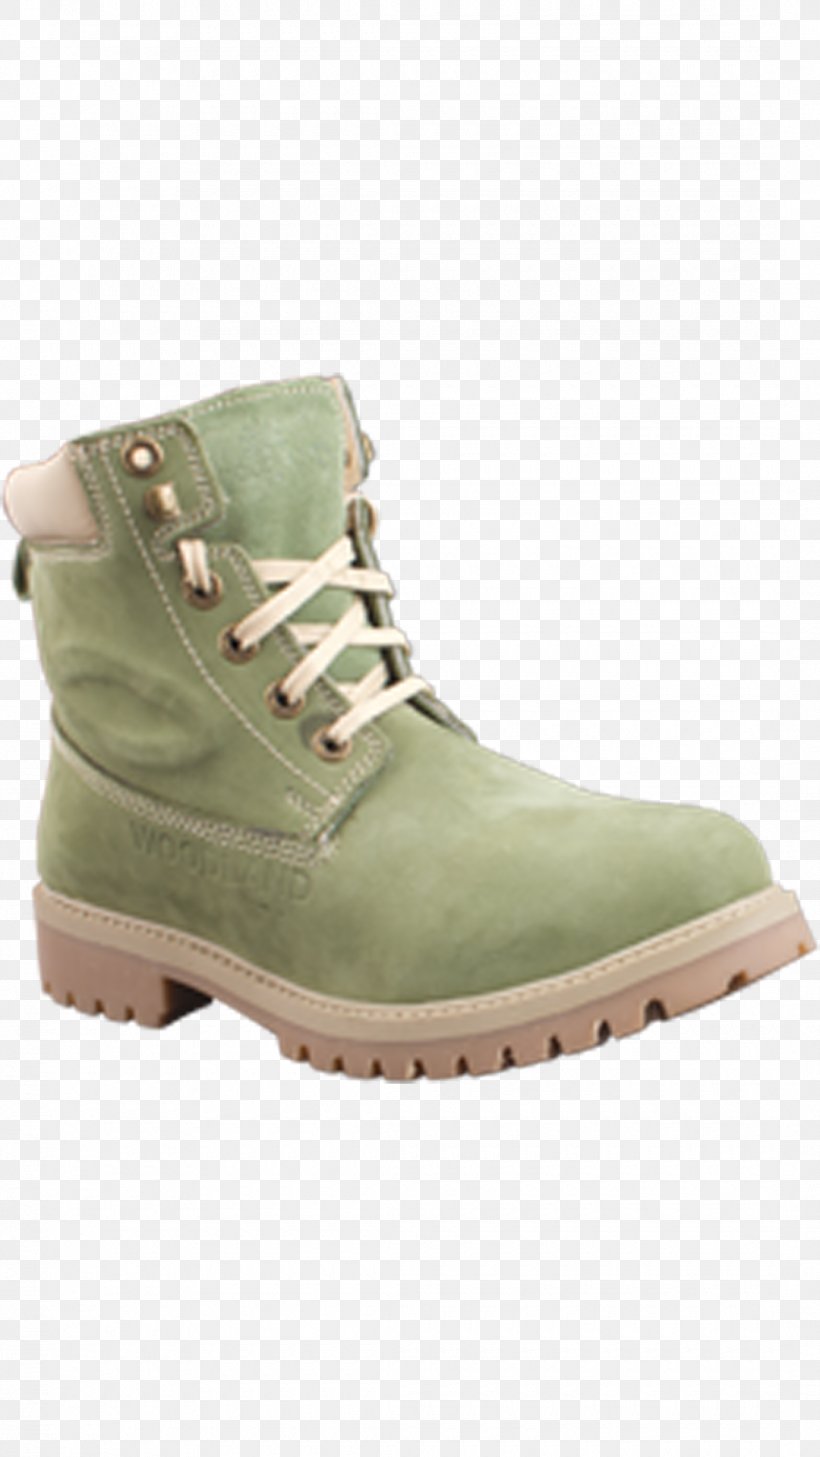 Snow Boot Shoe Sneakers Footwear, PNG, 1080x1920px, Boot, Ballet Flat, Beige, Casual, Fashion Download Free